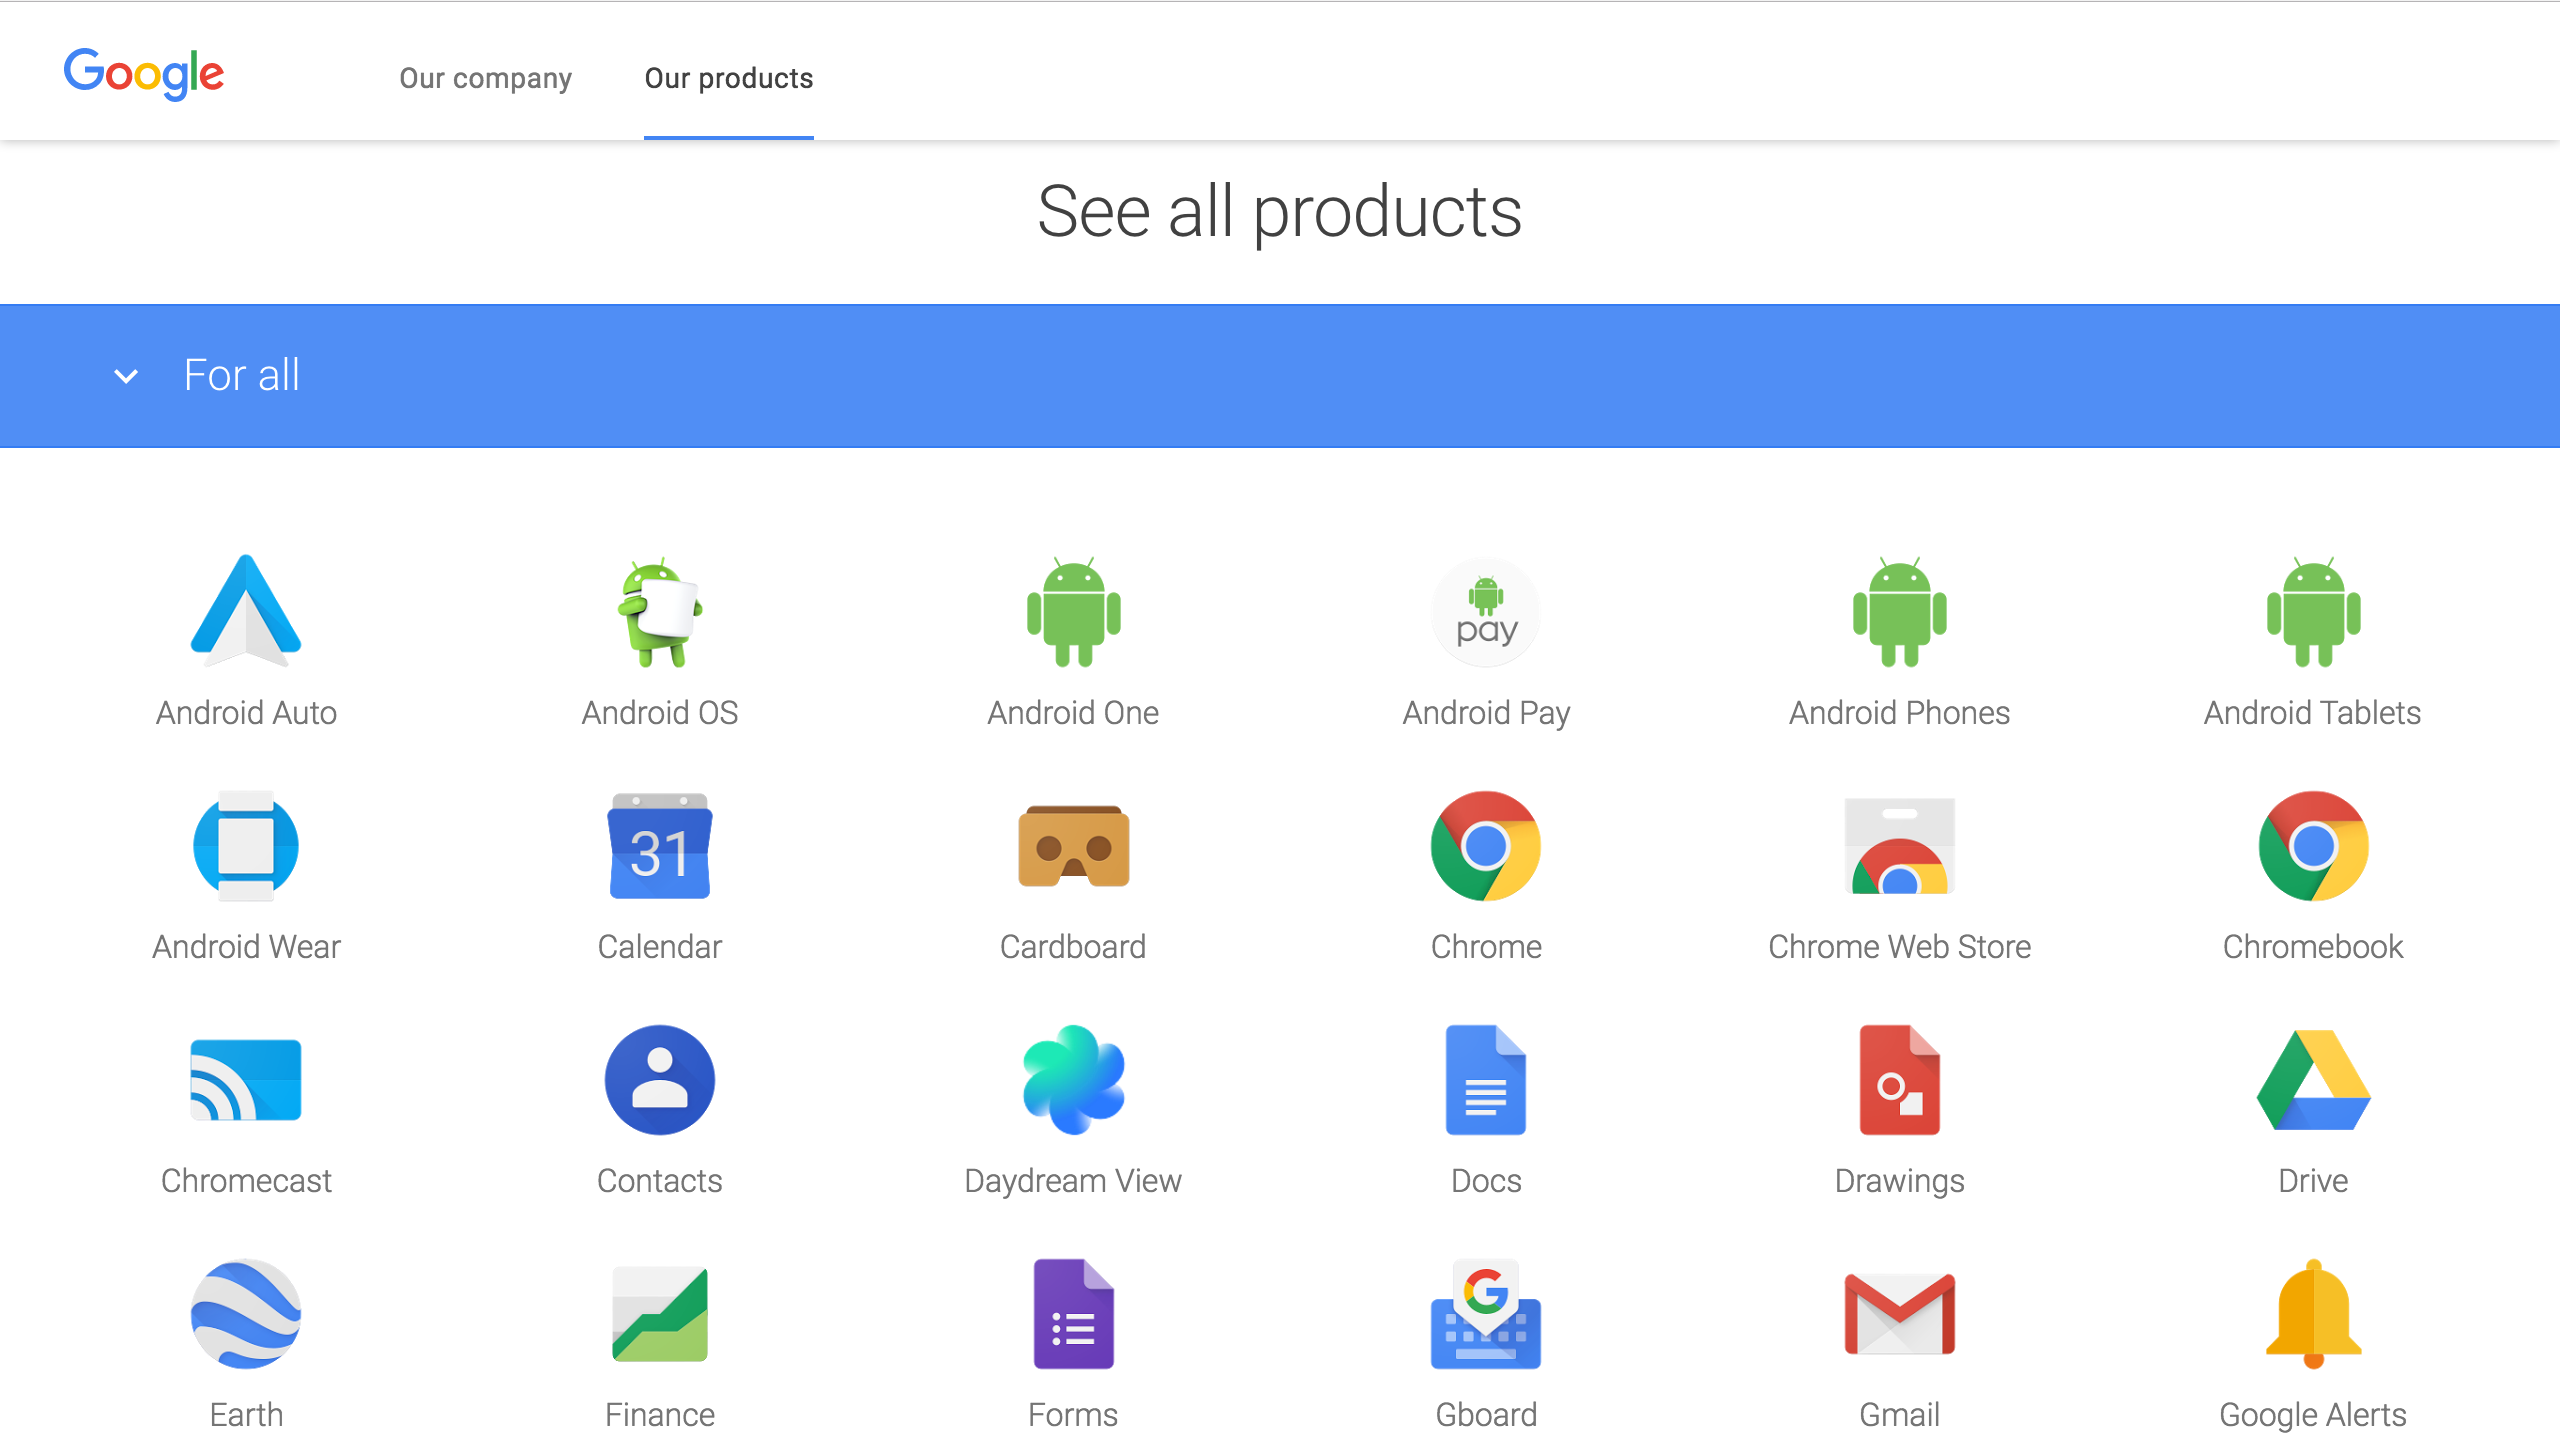 Google's redesigned product page showcases the company's entire